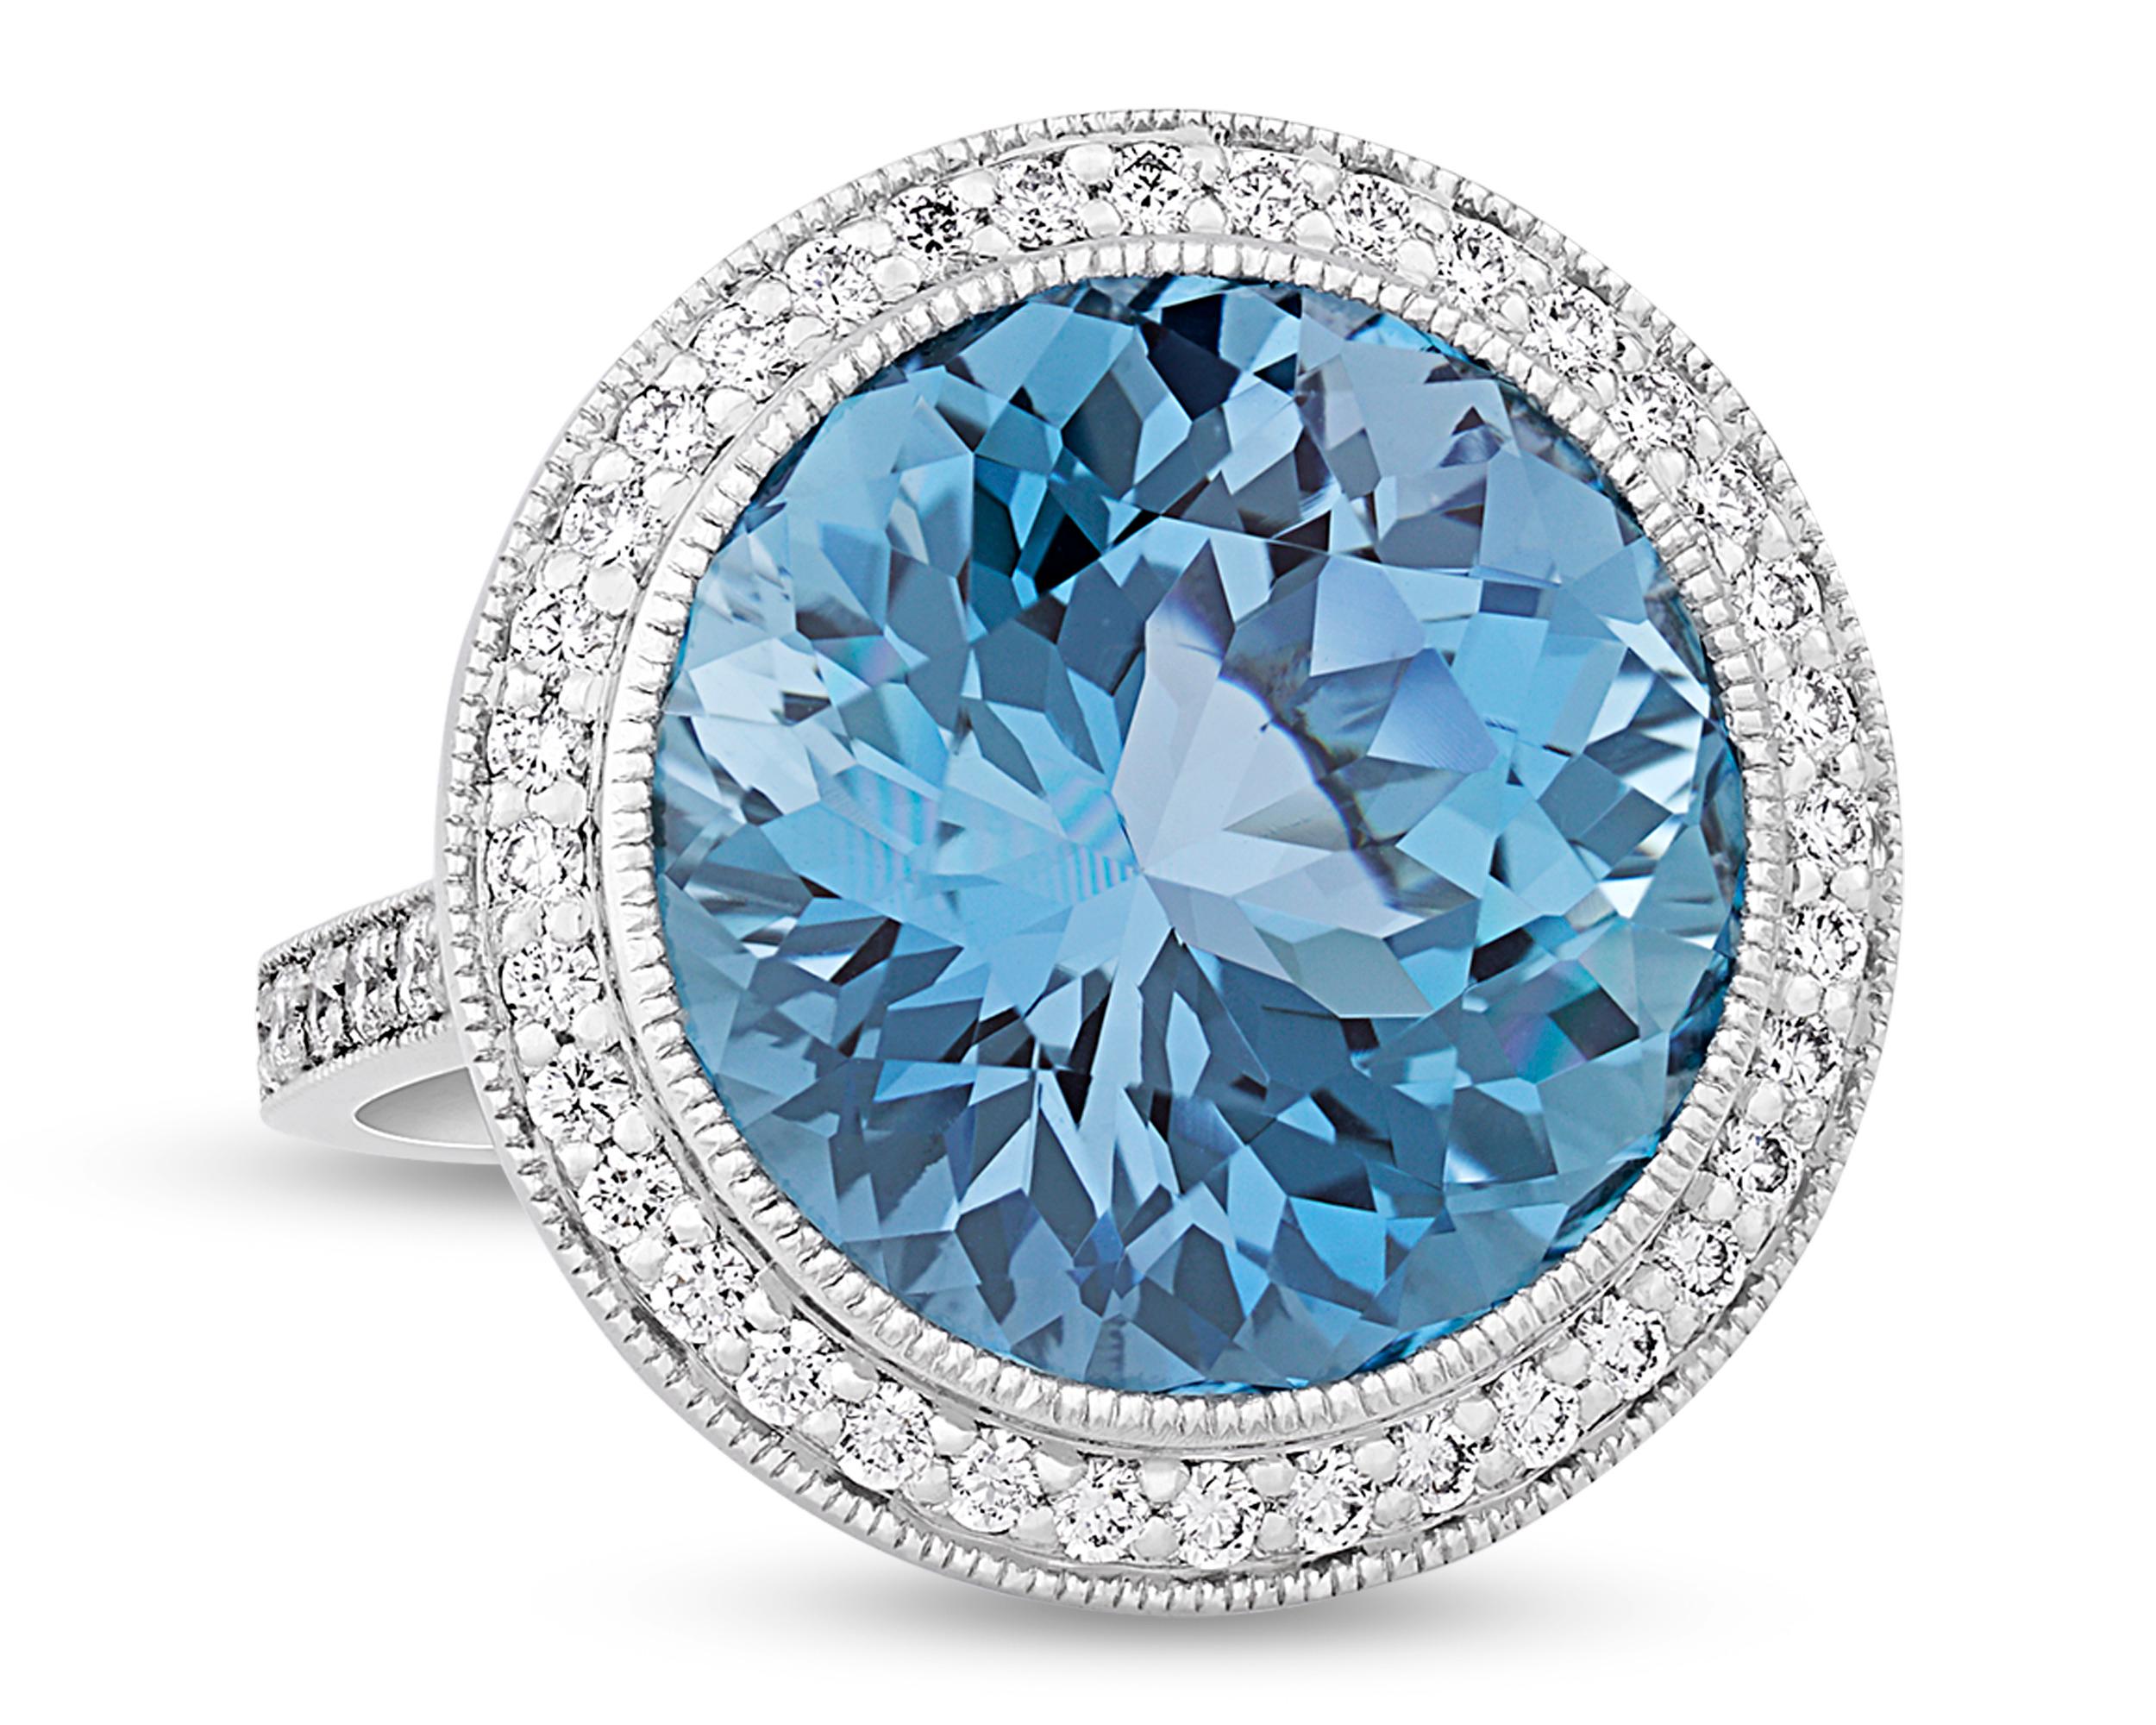 With the stunning blue hue of a clear tropical ocean, the incredible 13.17-carat round brilliant-cut aquamarine at the center of this ring is absolutely captivating. This specimen possesses the deeply saturated Santa Maria blue hue that is found